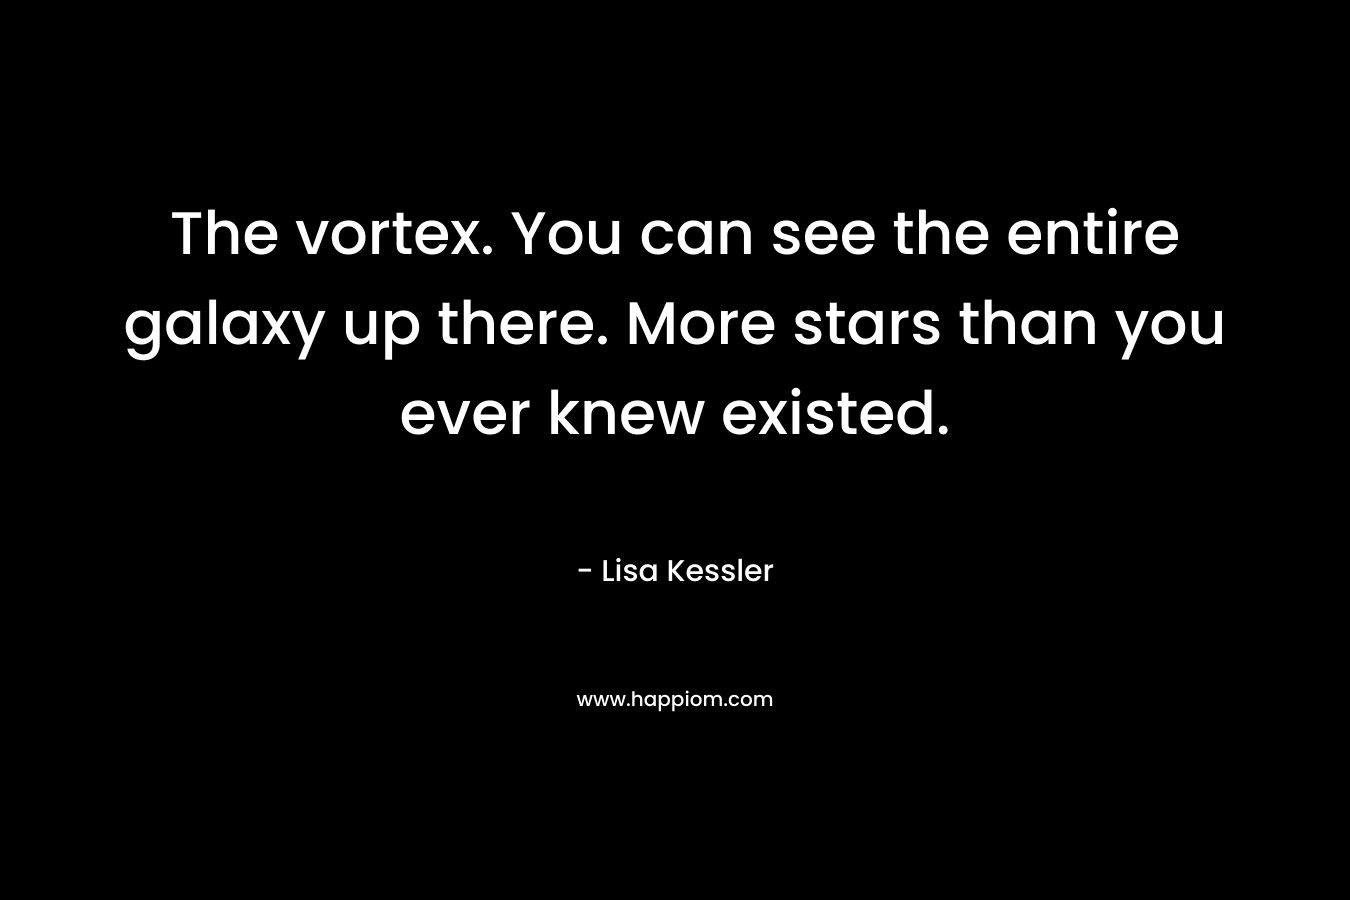 The vortex. You can see the entire galaxy up there. More stars than you ever knew existed.